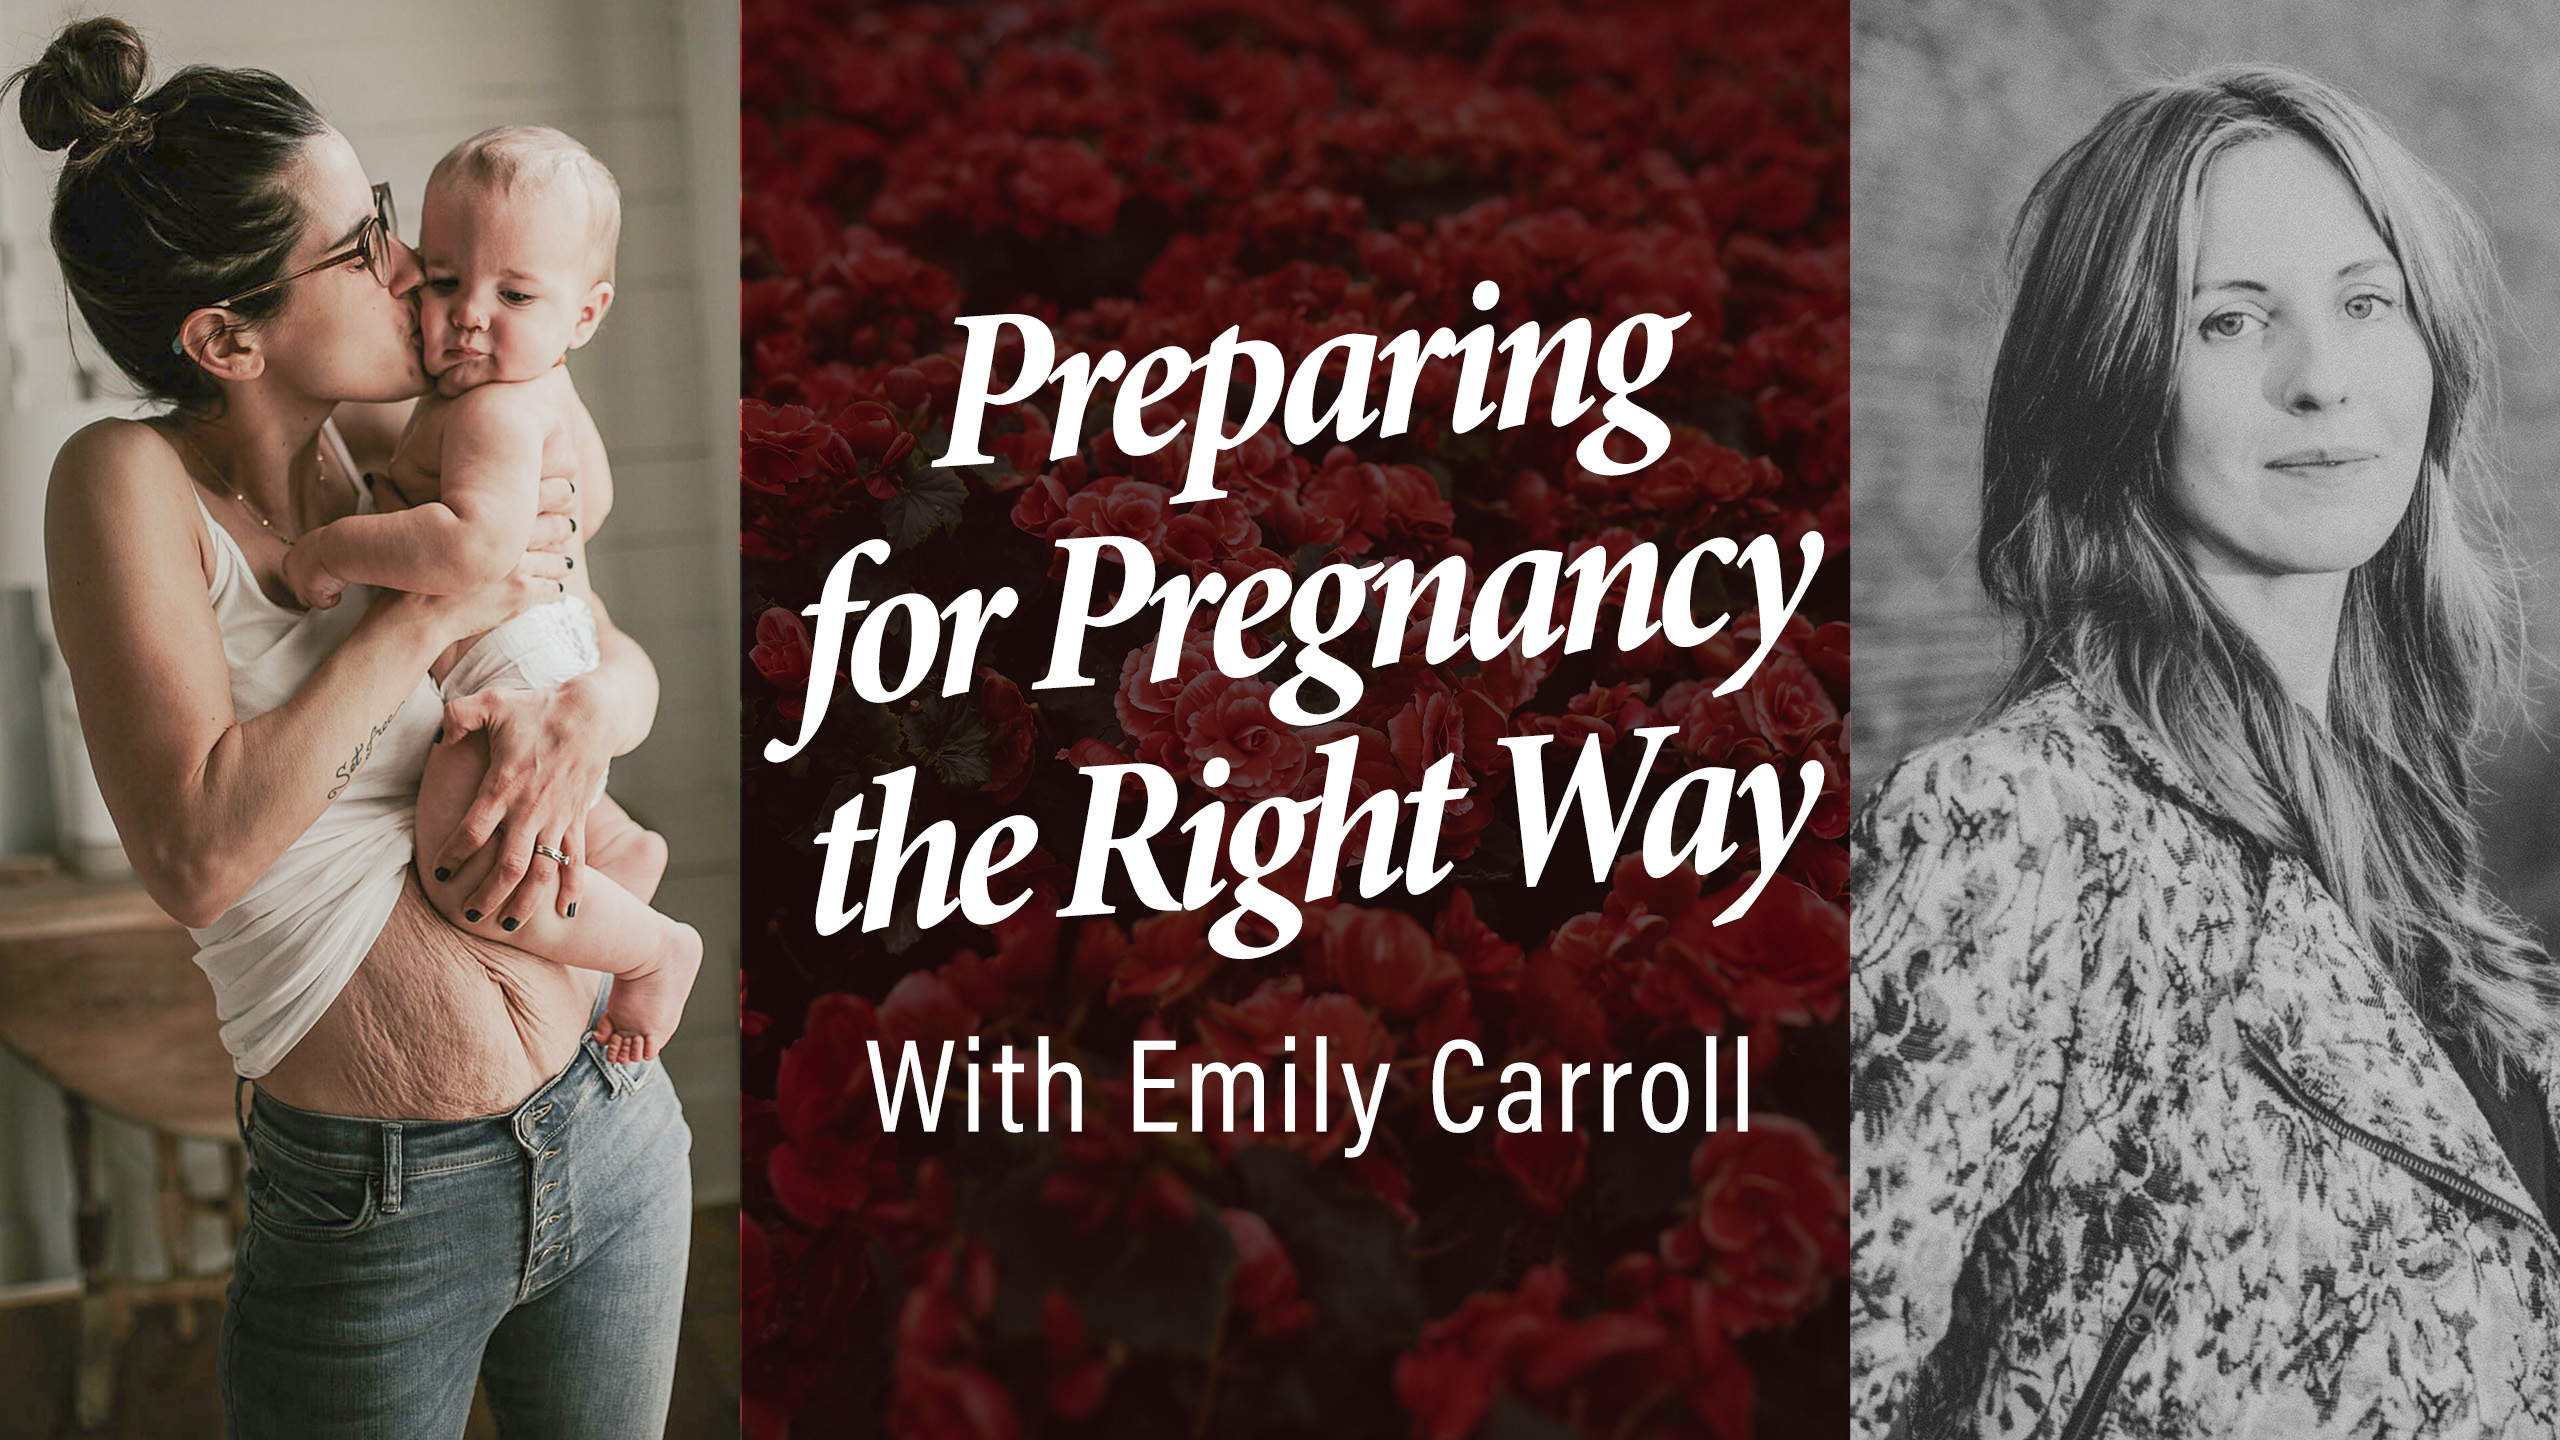 Preparing for Pregnancy the Right Way